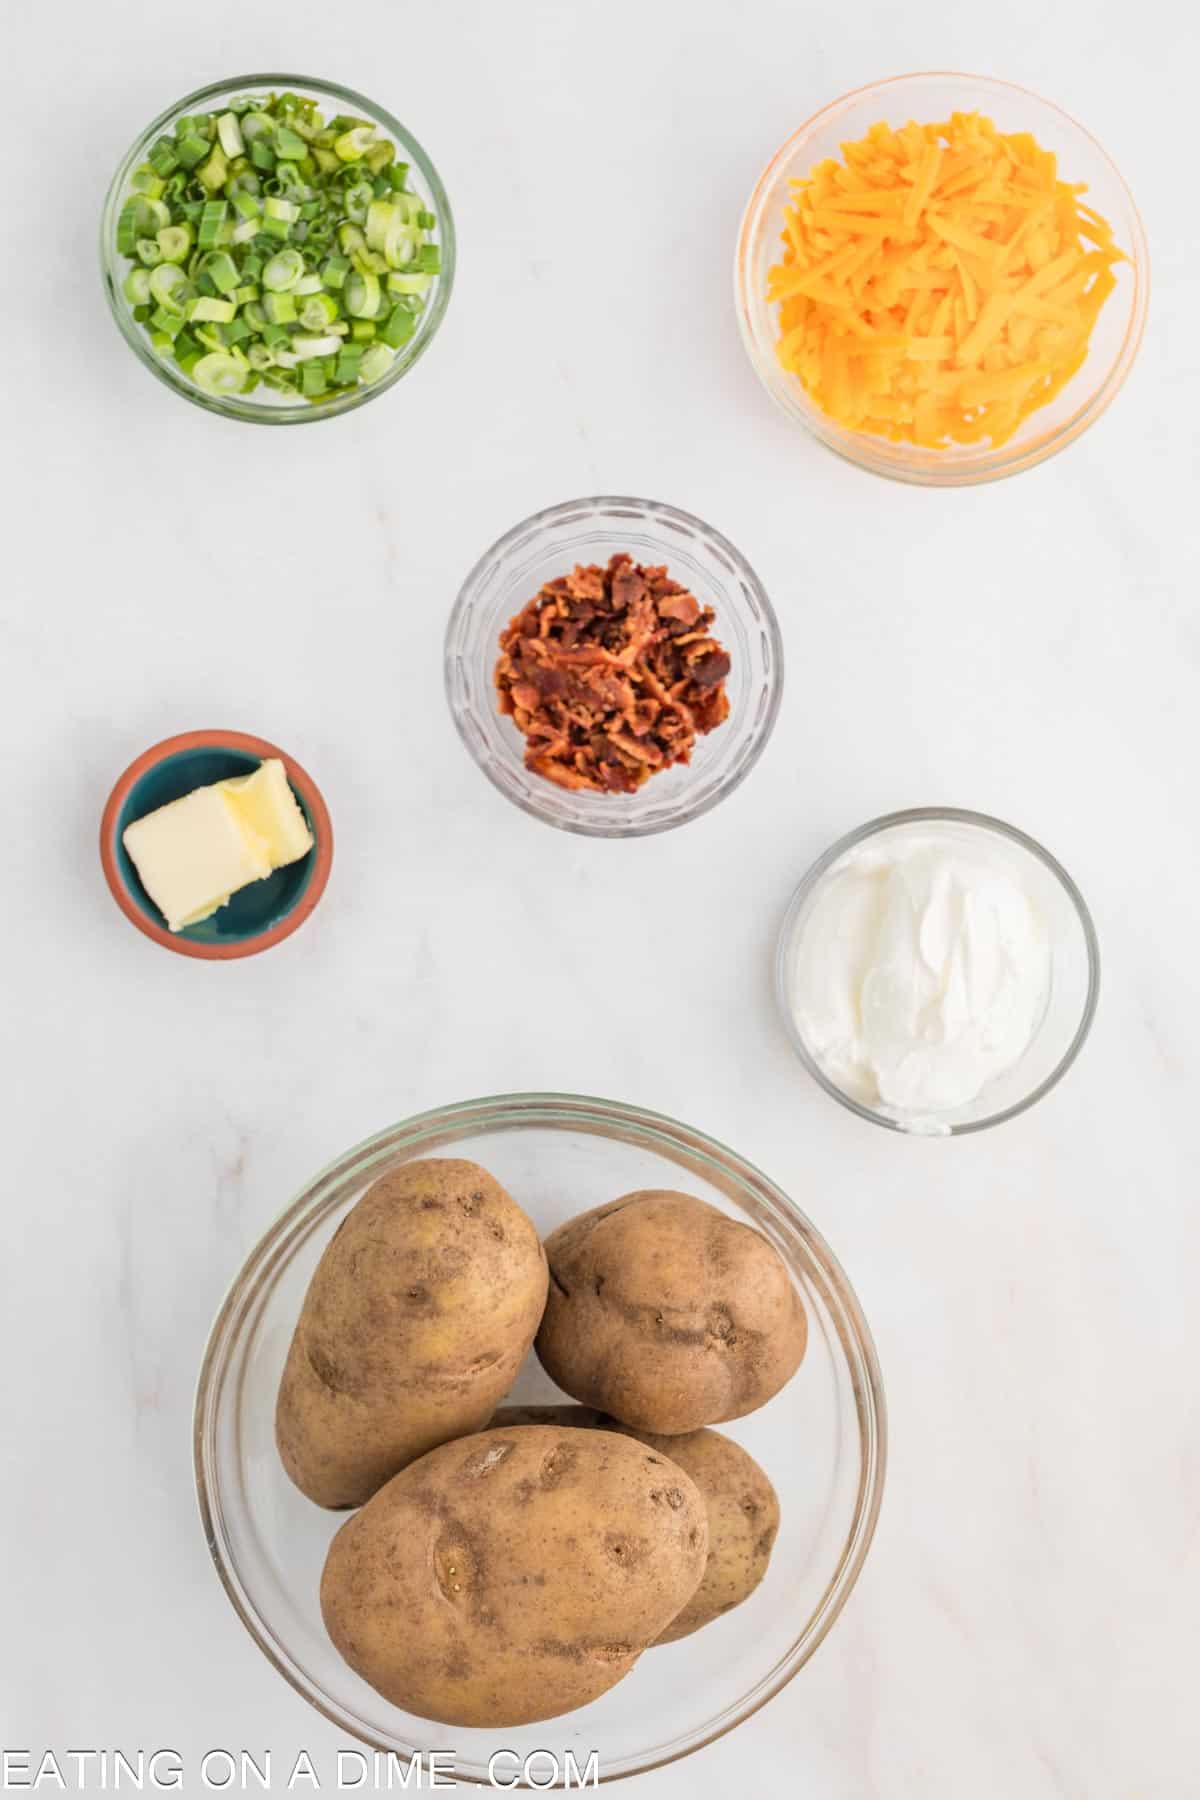 Microwave Bake Potato Ingredients - potatoes, toppings, salt and pepper